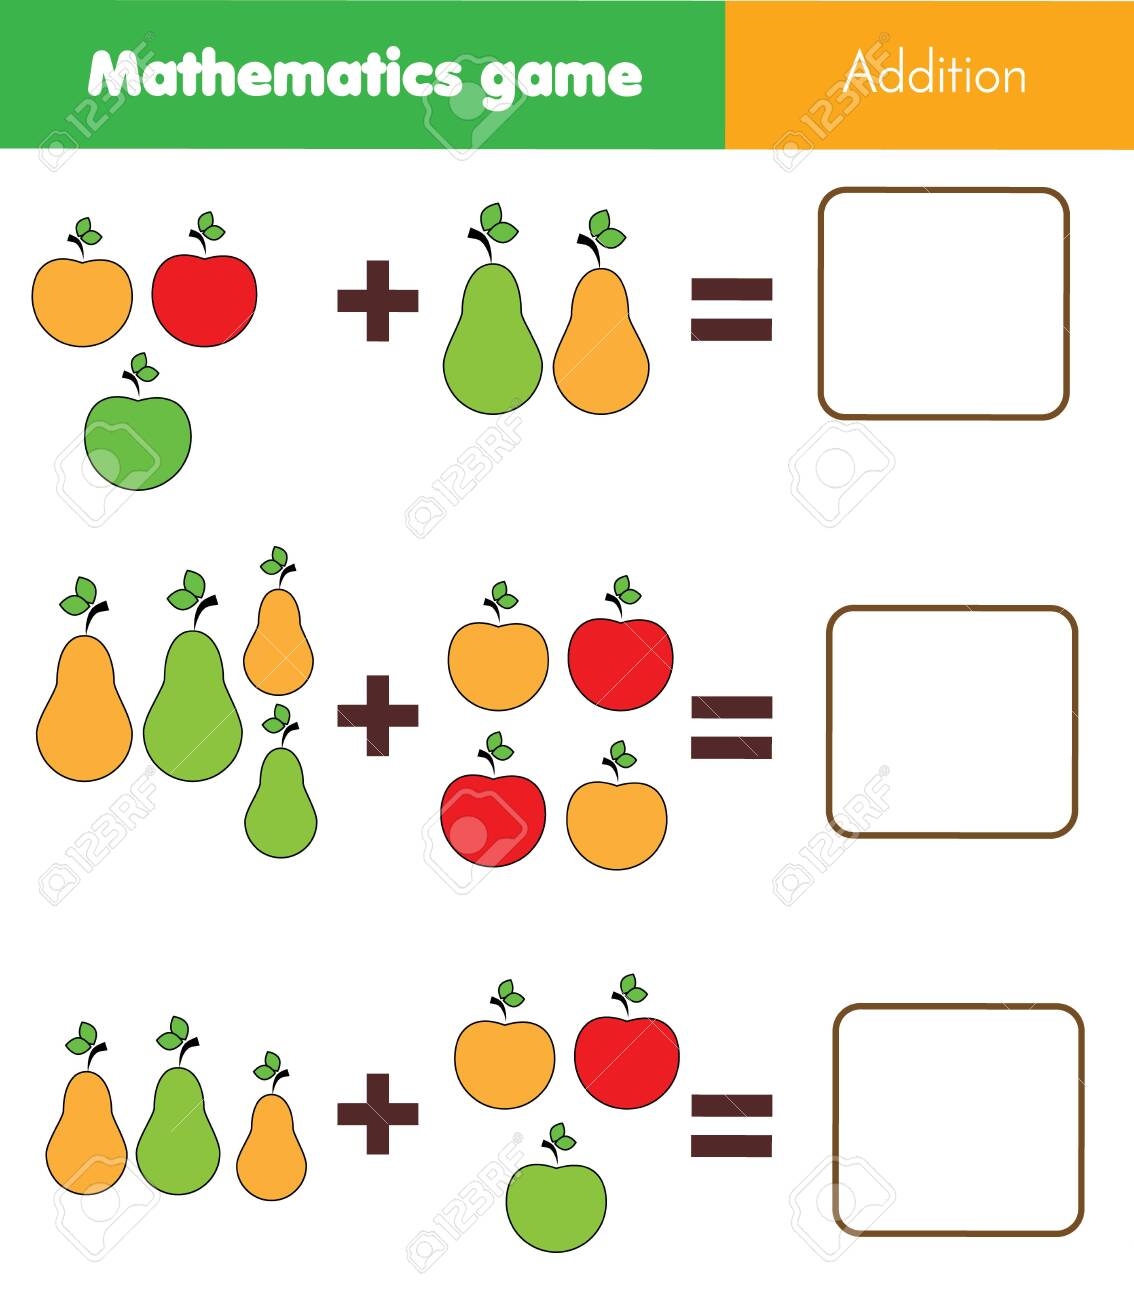 Math Educational Game For Children Counting Equations Addition Worksheet With Fruits Royalty Free SVG Cliparts Vectors And Stock Illustration Image 122278886 